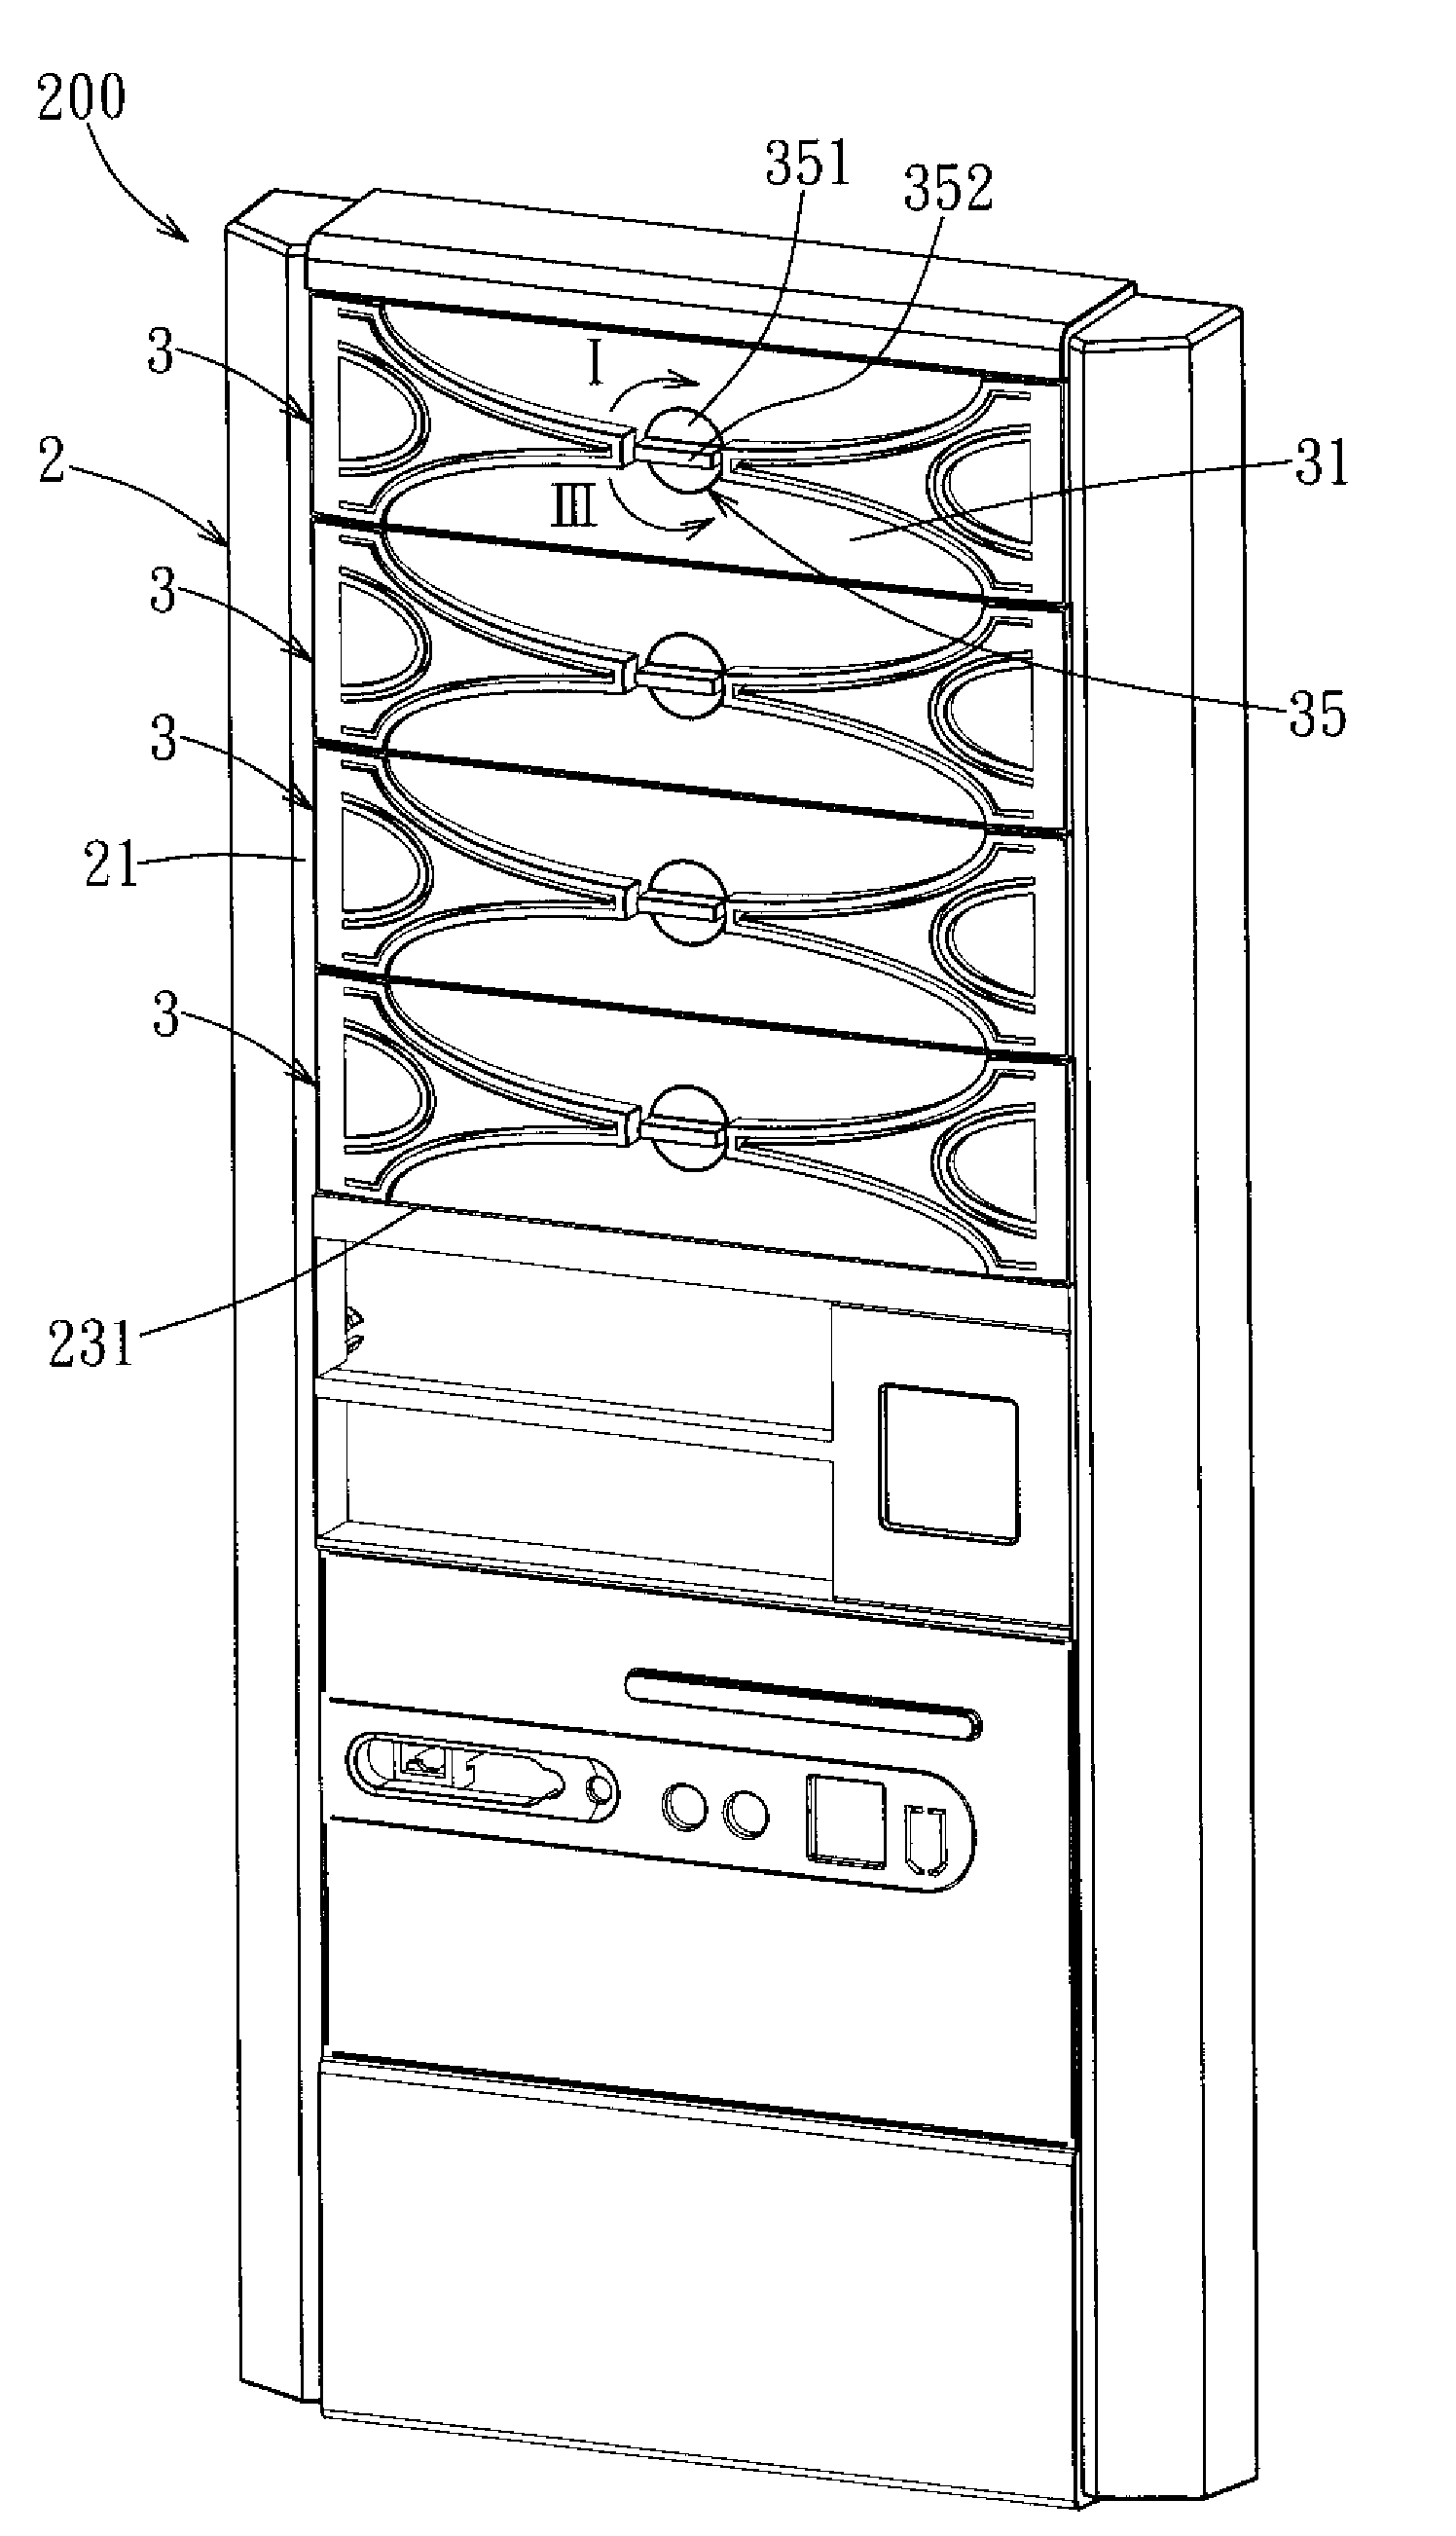 Face Panel for a Computer Housing